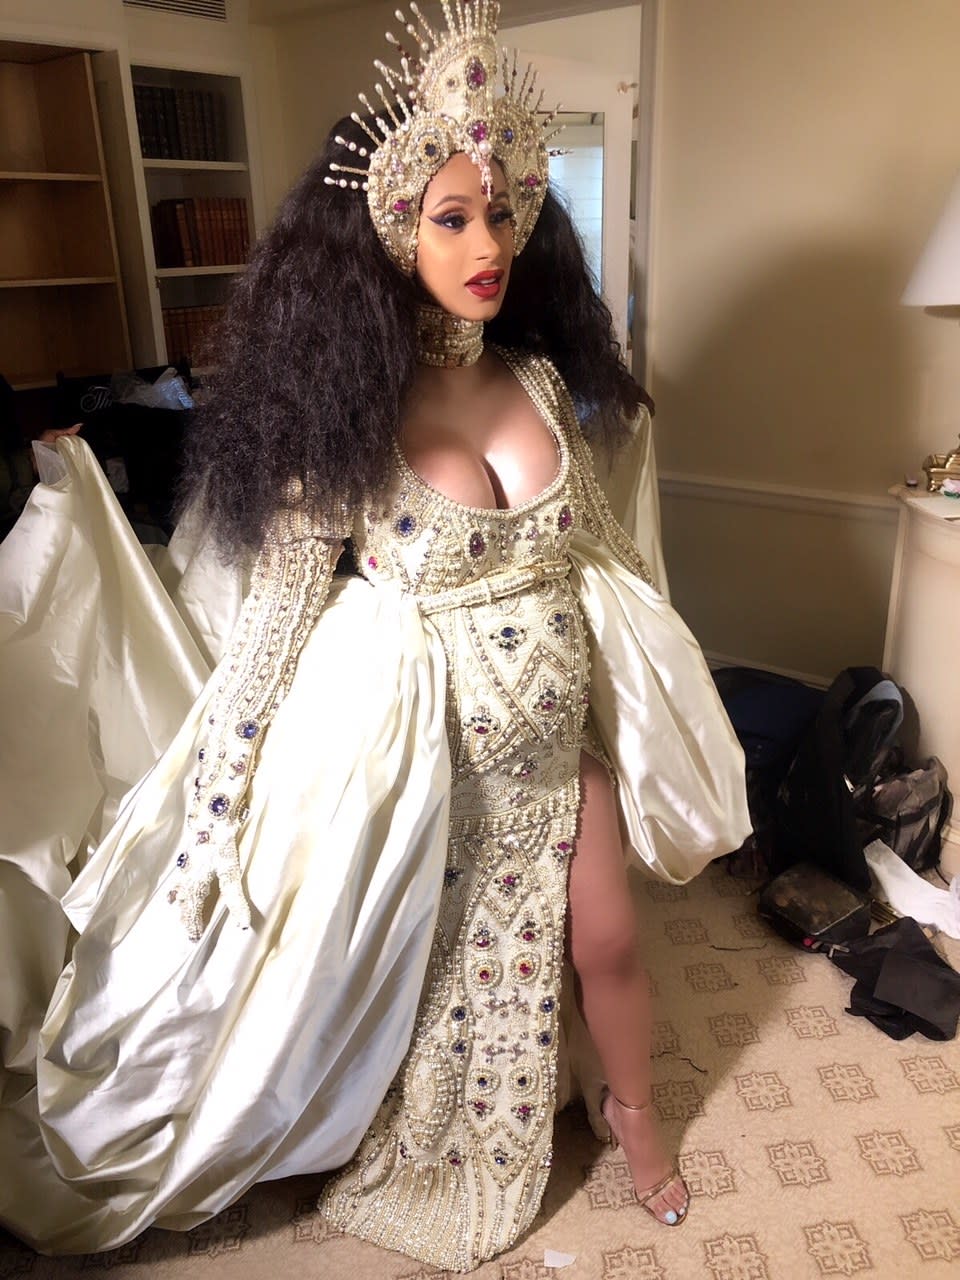 This is Cardi B's first time attending the Met Gala, and she pulled all the stops with a look from make-up artist Erika La Pearl including Kiss false eyelashes.